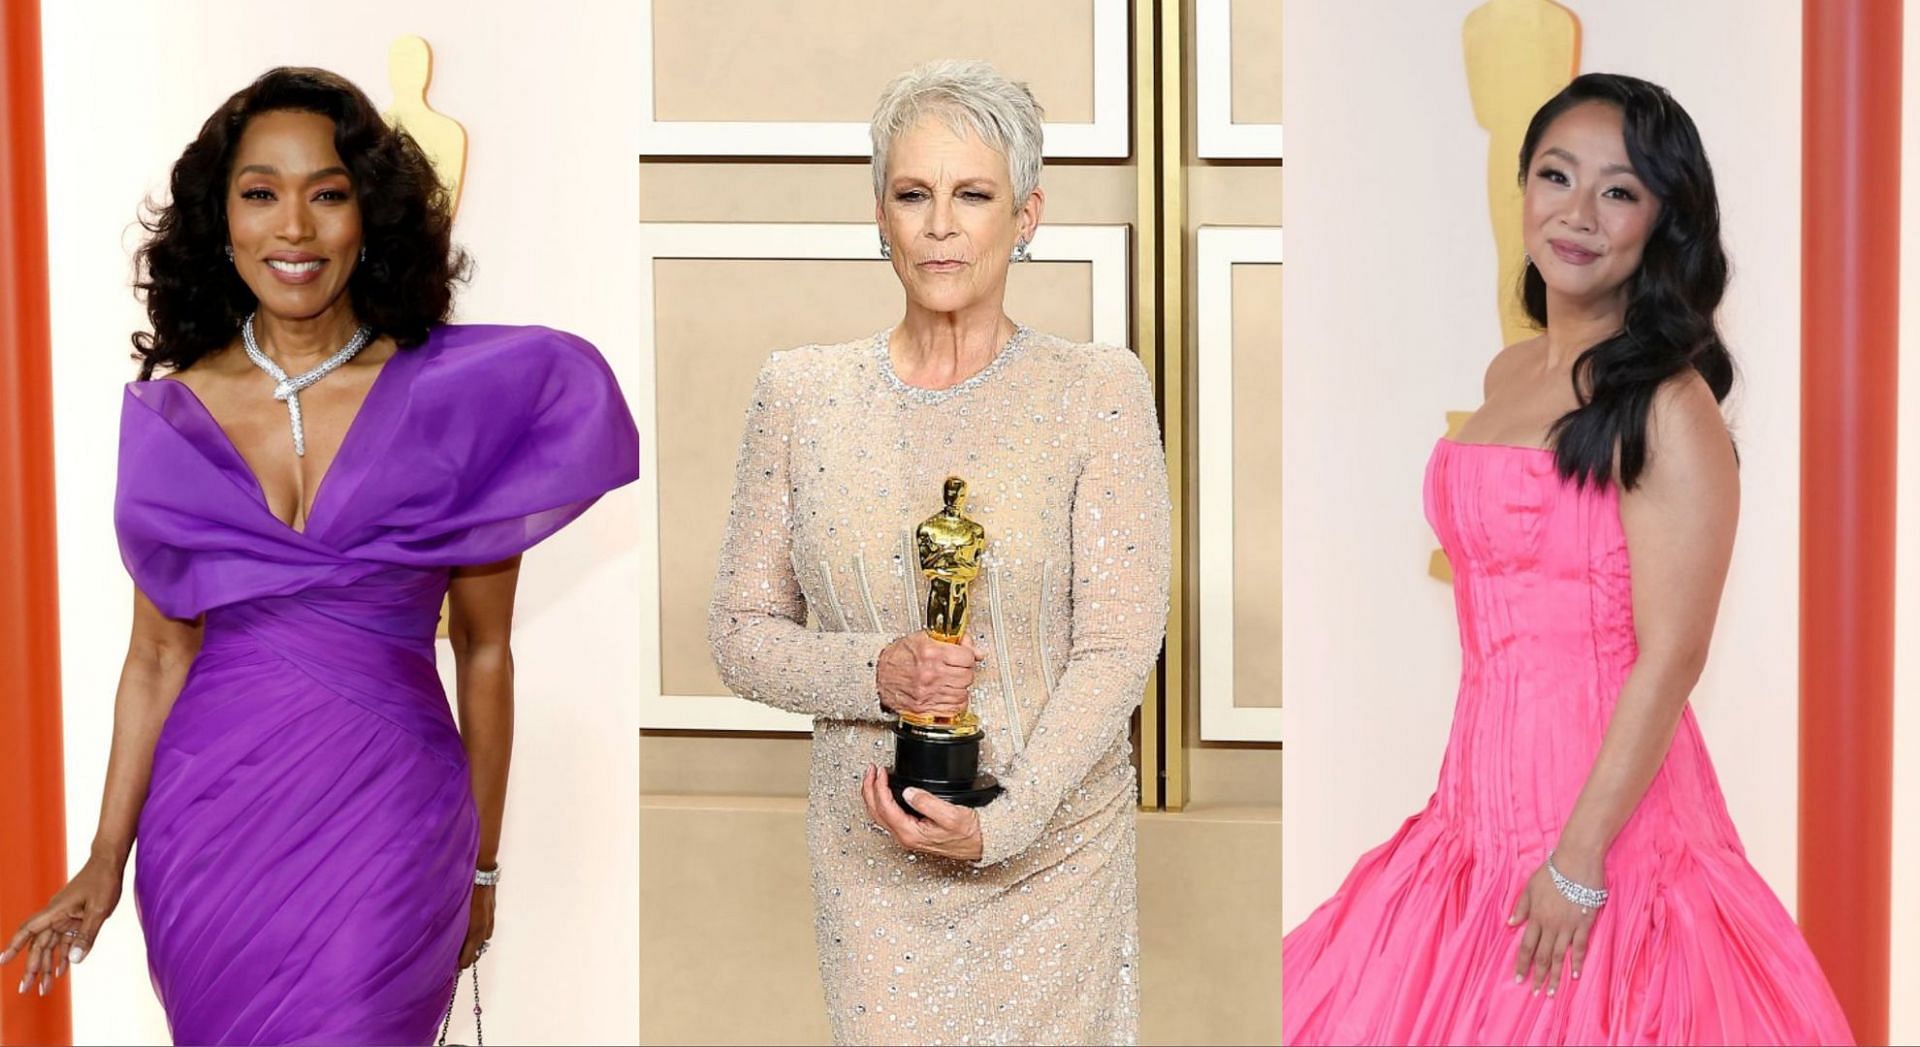 Jamie Lee Curtis won the Oscar Award for Best Supporting Actress beating Stephanie Hsu and Angela Bassett (Image via Getty Images)